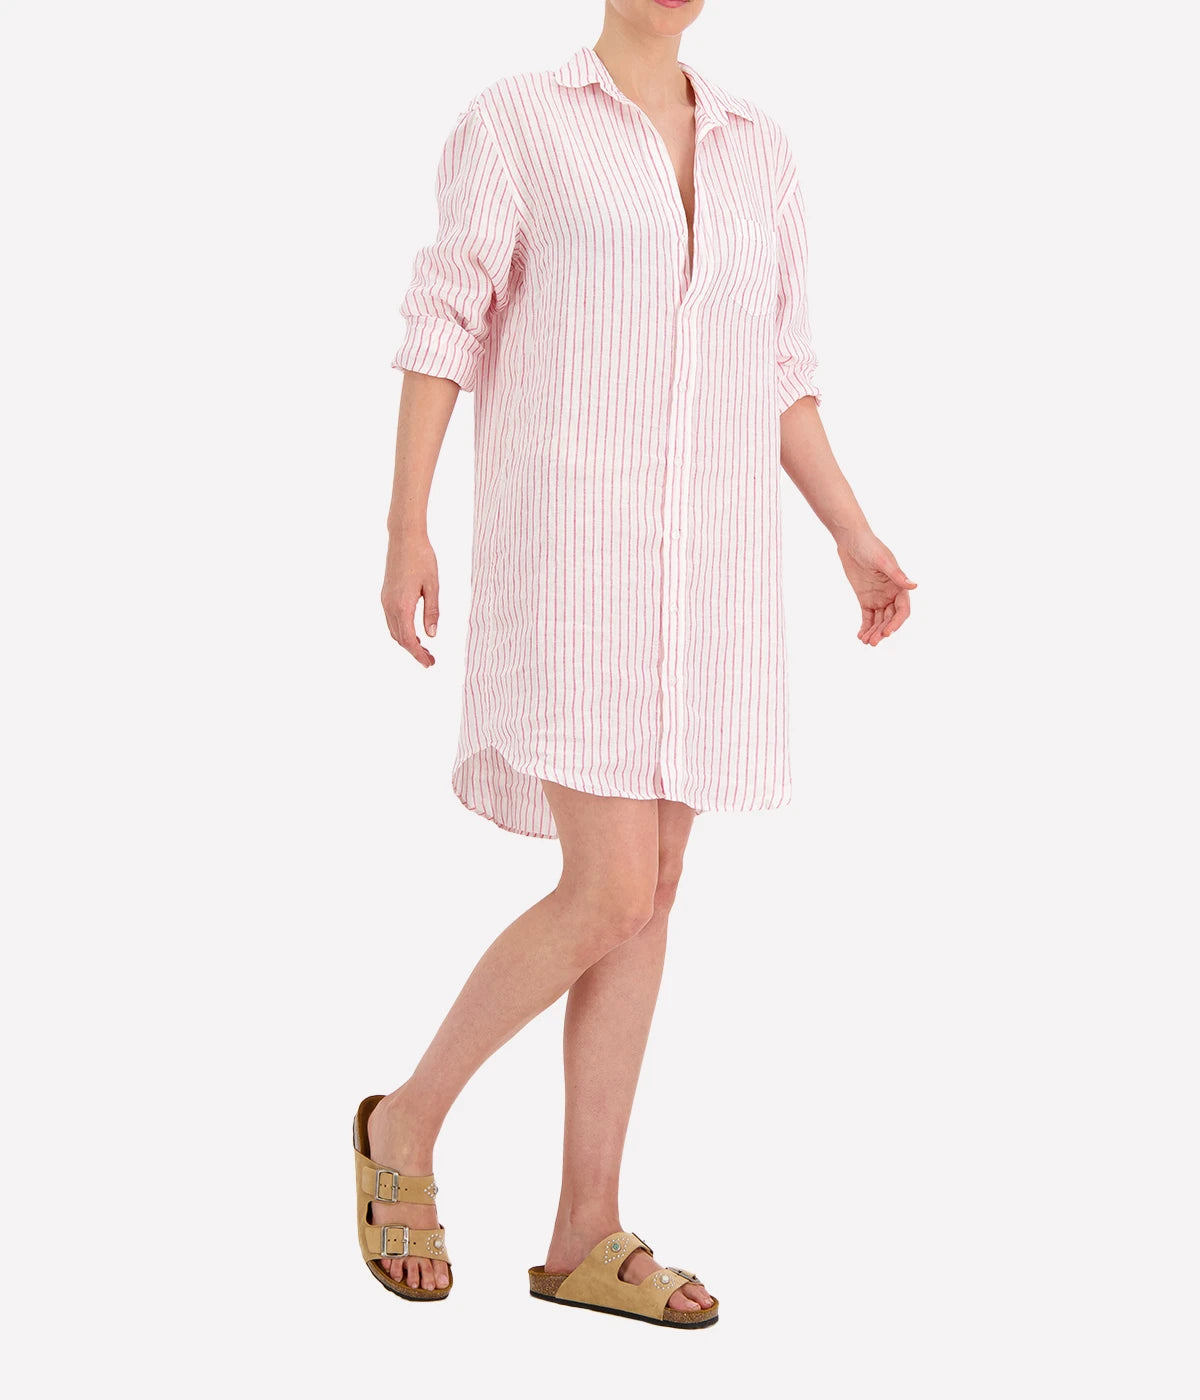 Mary Woven Button Up Dress in Pink Stripe